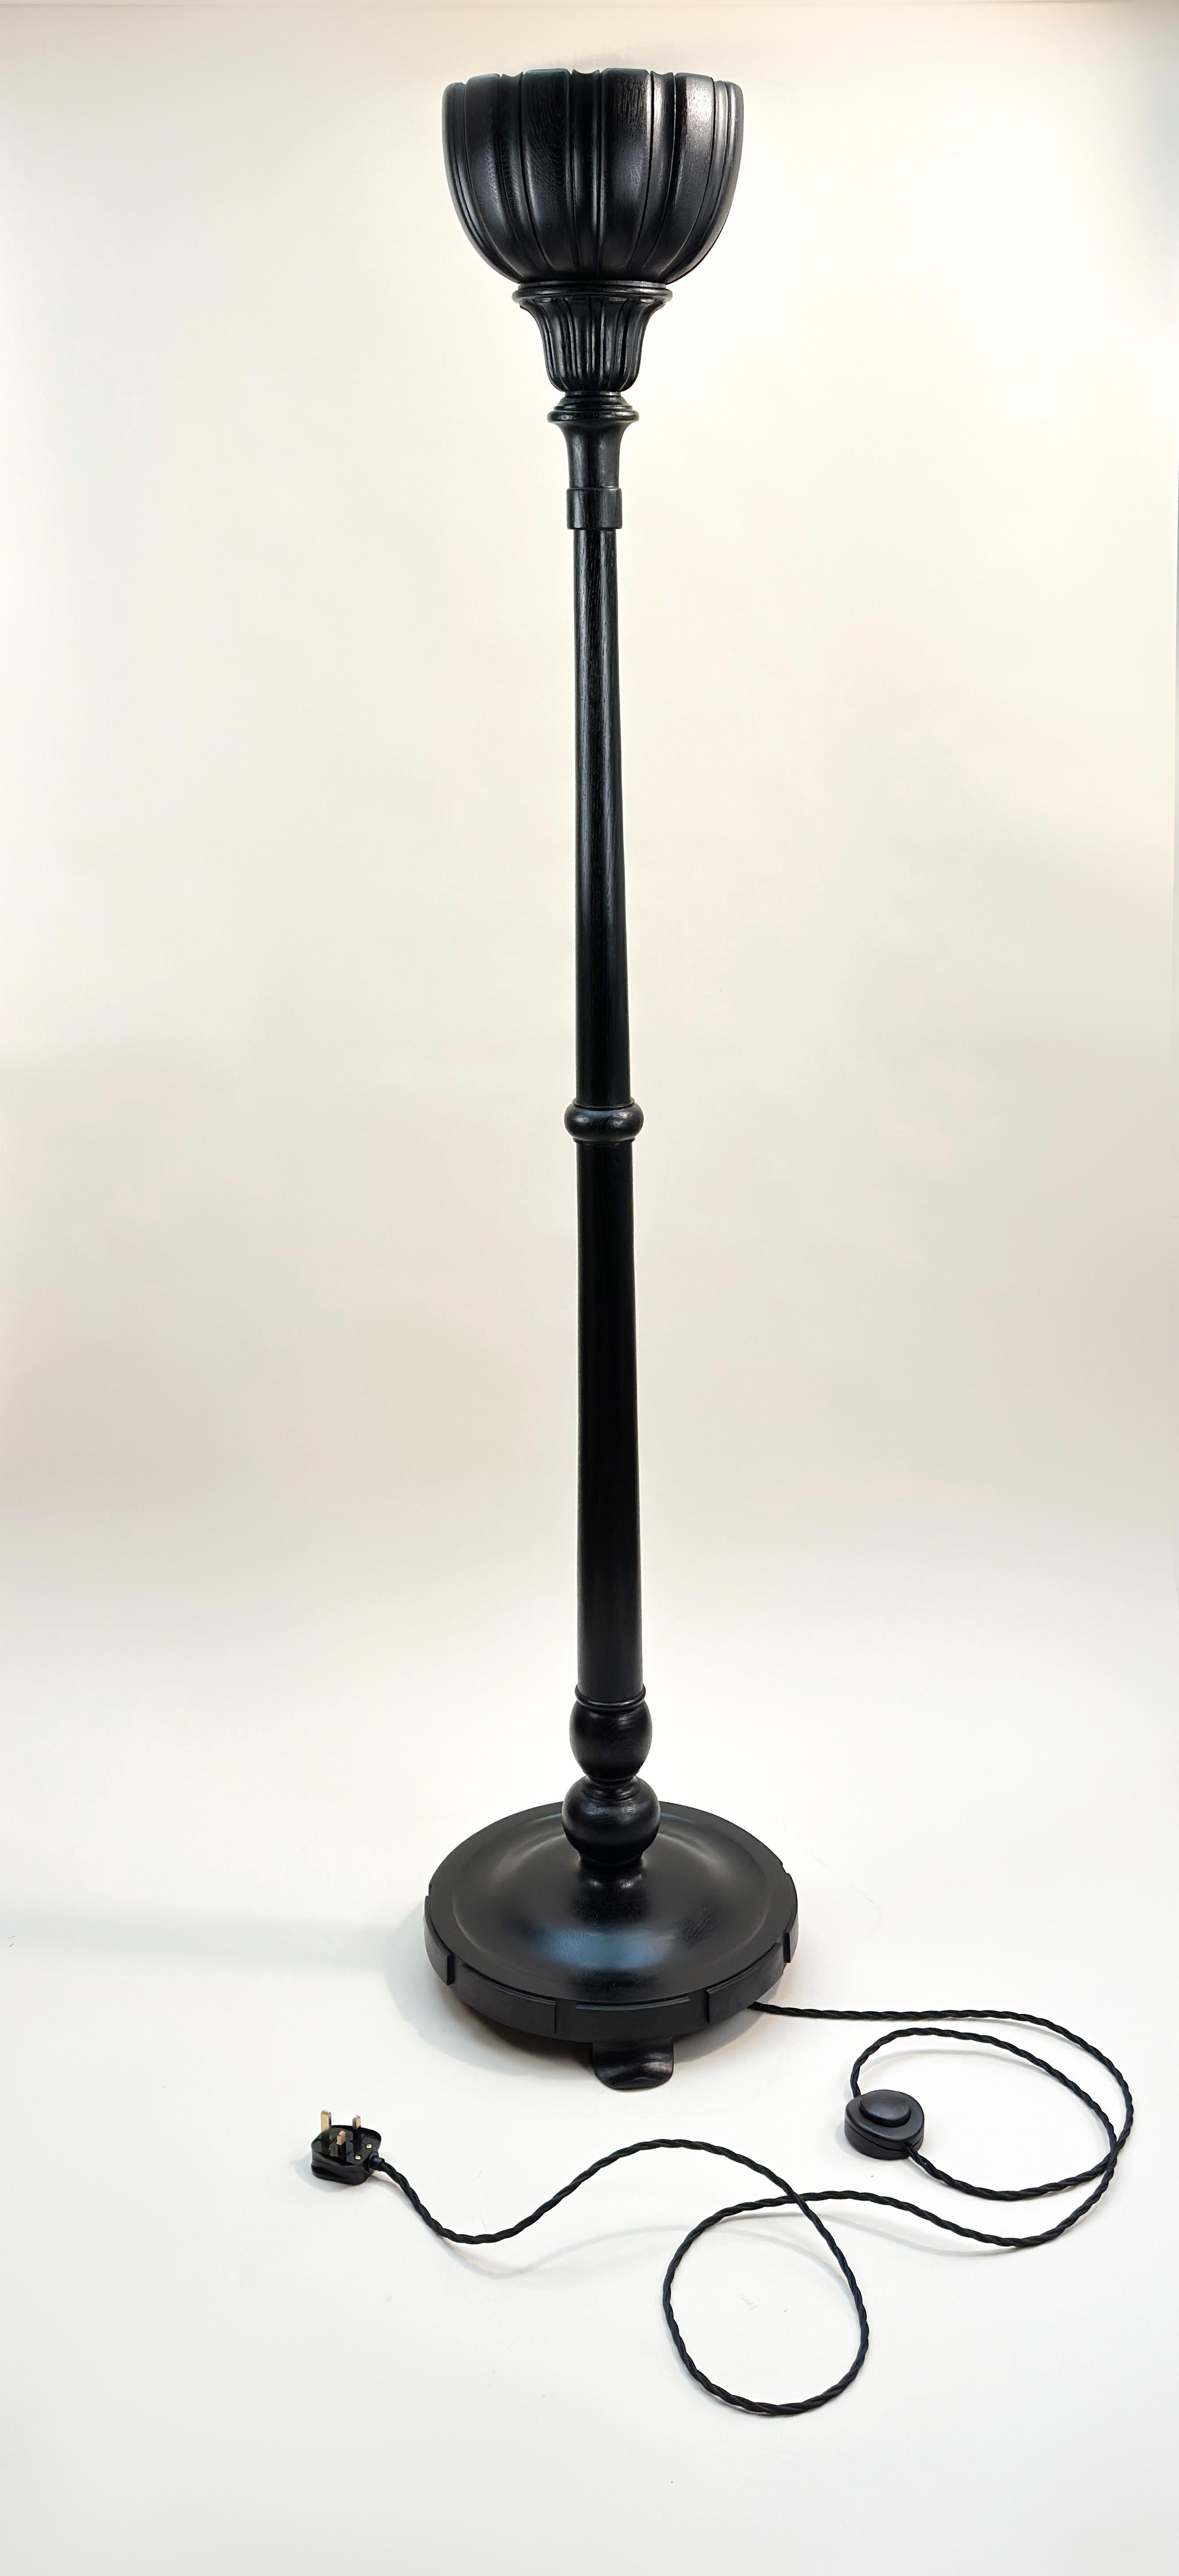 Victorian 'Torchere Style' Floor Lamp

This Victorian floor lamp, dating back to the early 20th century, was meticulously crafted from English oak. Originally designed for use inside a UK bank, it features three elegantly swooping feet supporting a